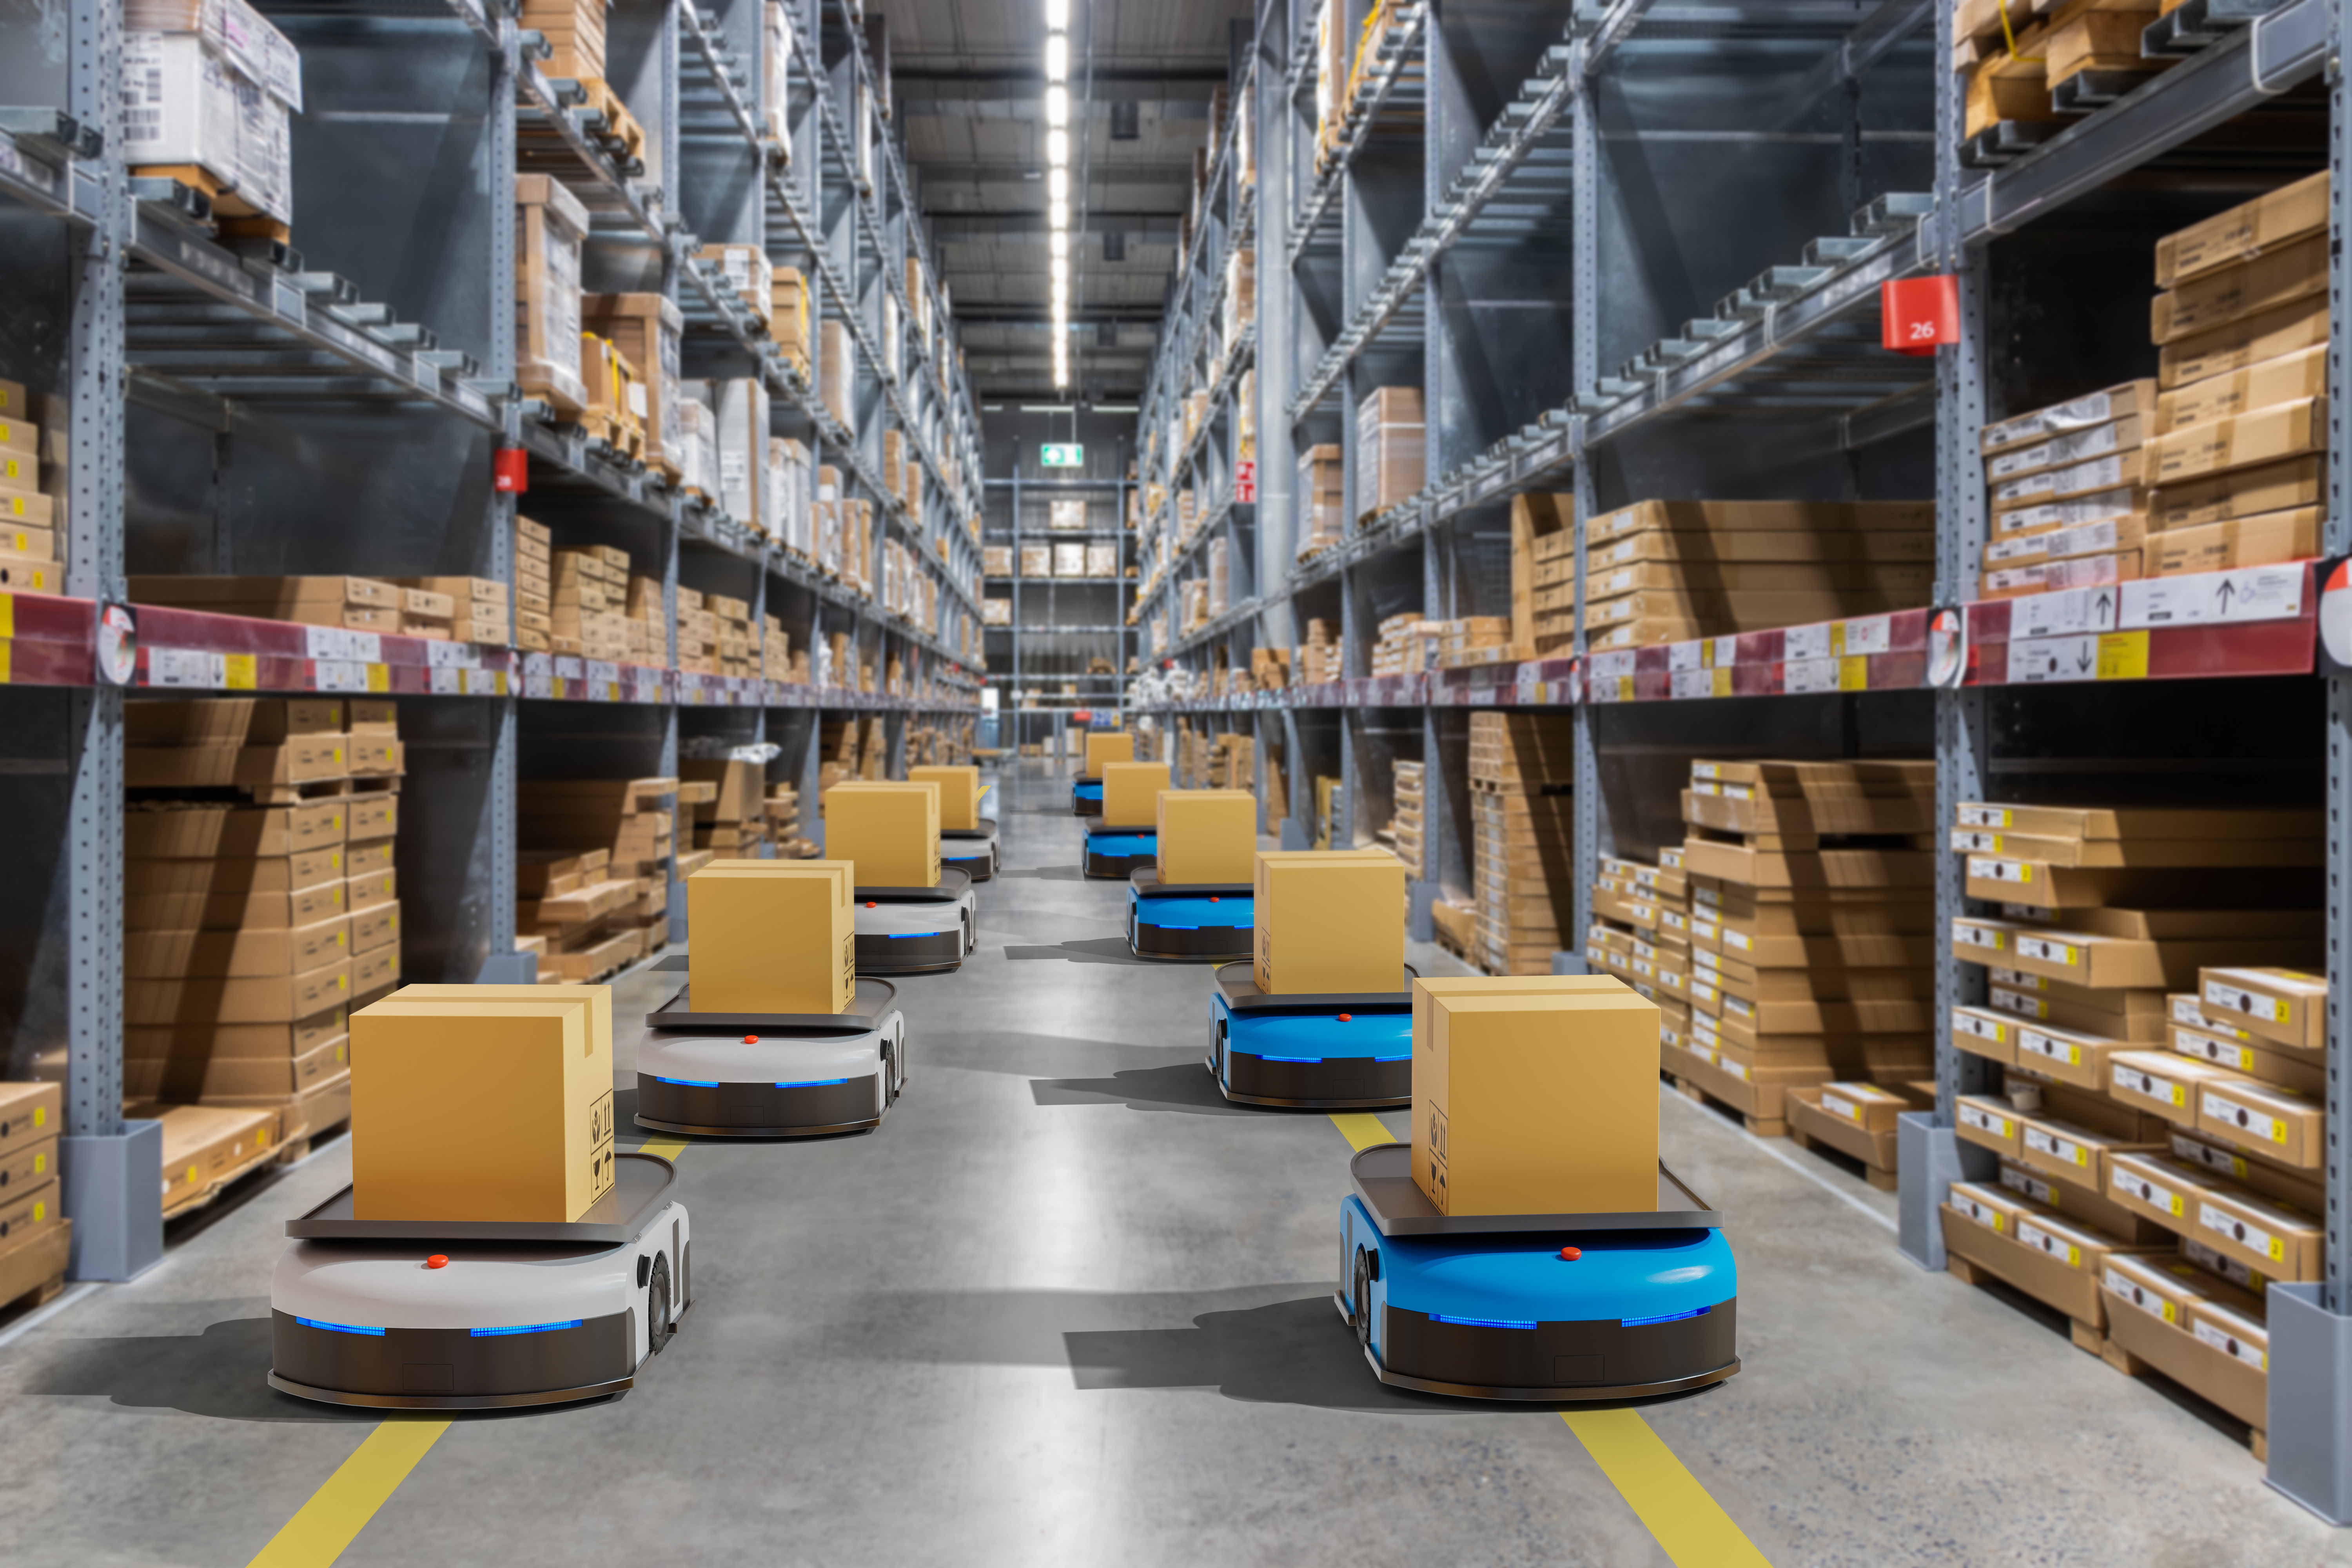 Robots transport parcels in a warehouse